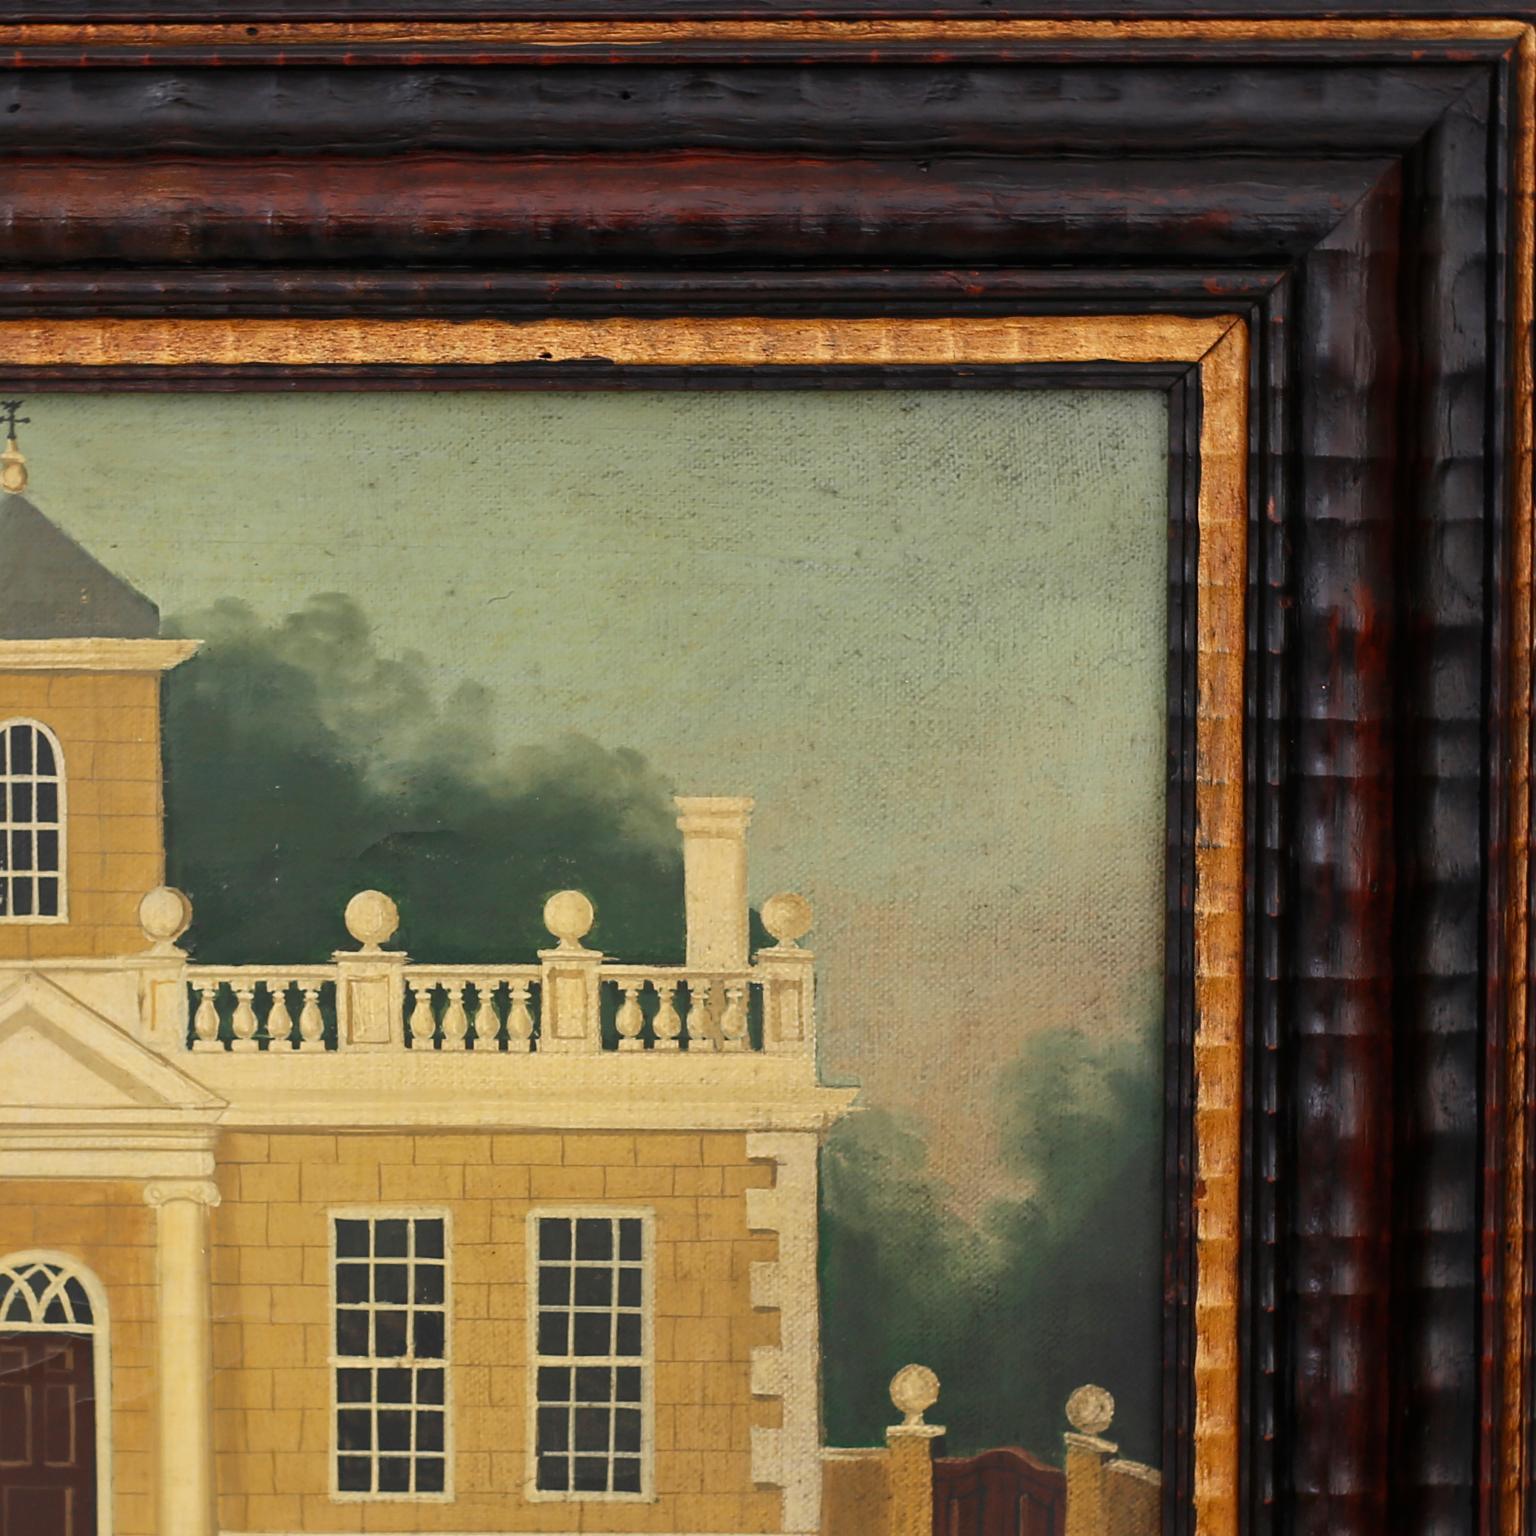 Architectural oil painting on canvas of the Ebbeston Lodge in the county of Yorkshire by Dan Dunton, executed in a rustic naive style and presented in a carved wood frame.